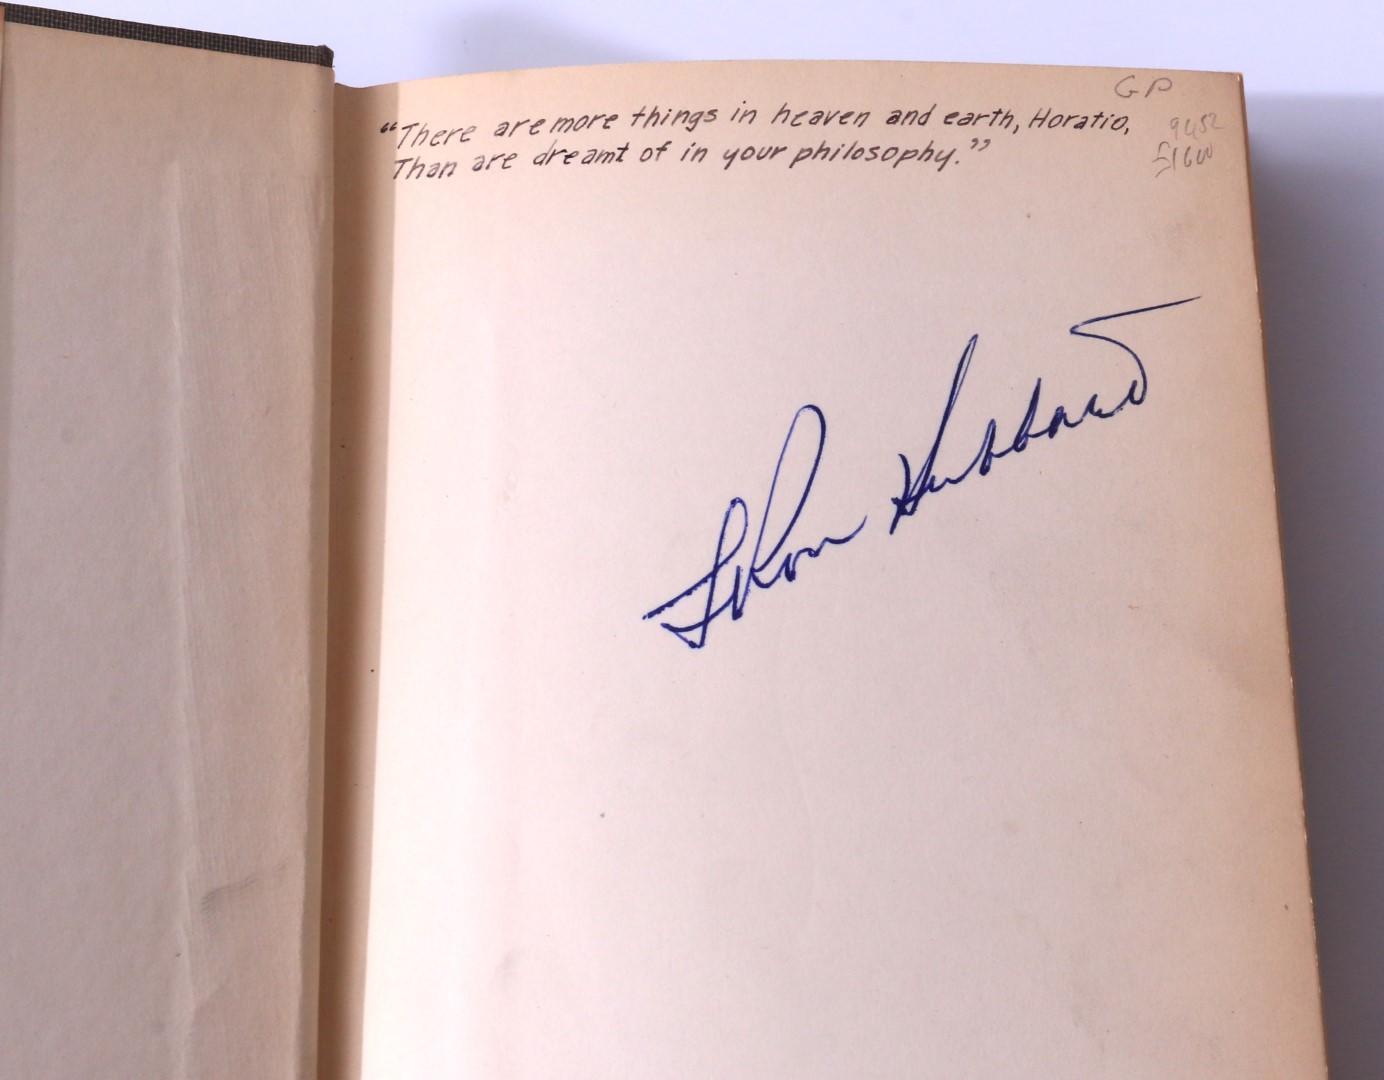 L. Ron Hubbard - Slaves of Sleep - Shasta, 1948, Signed First Edition.